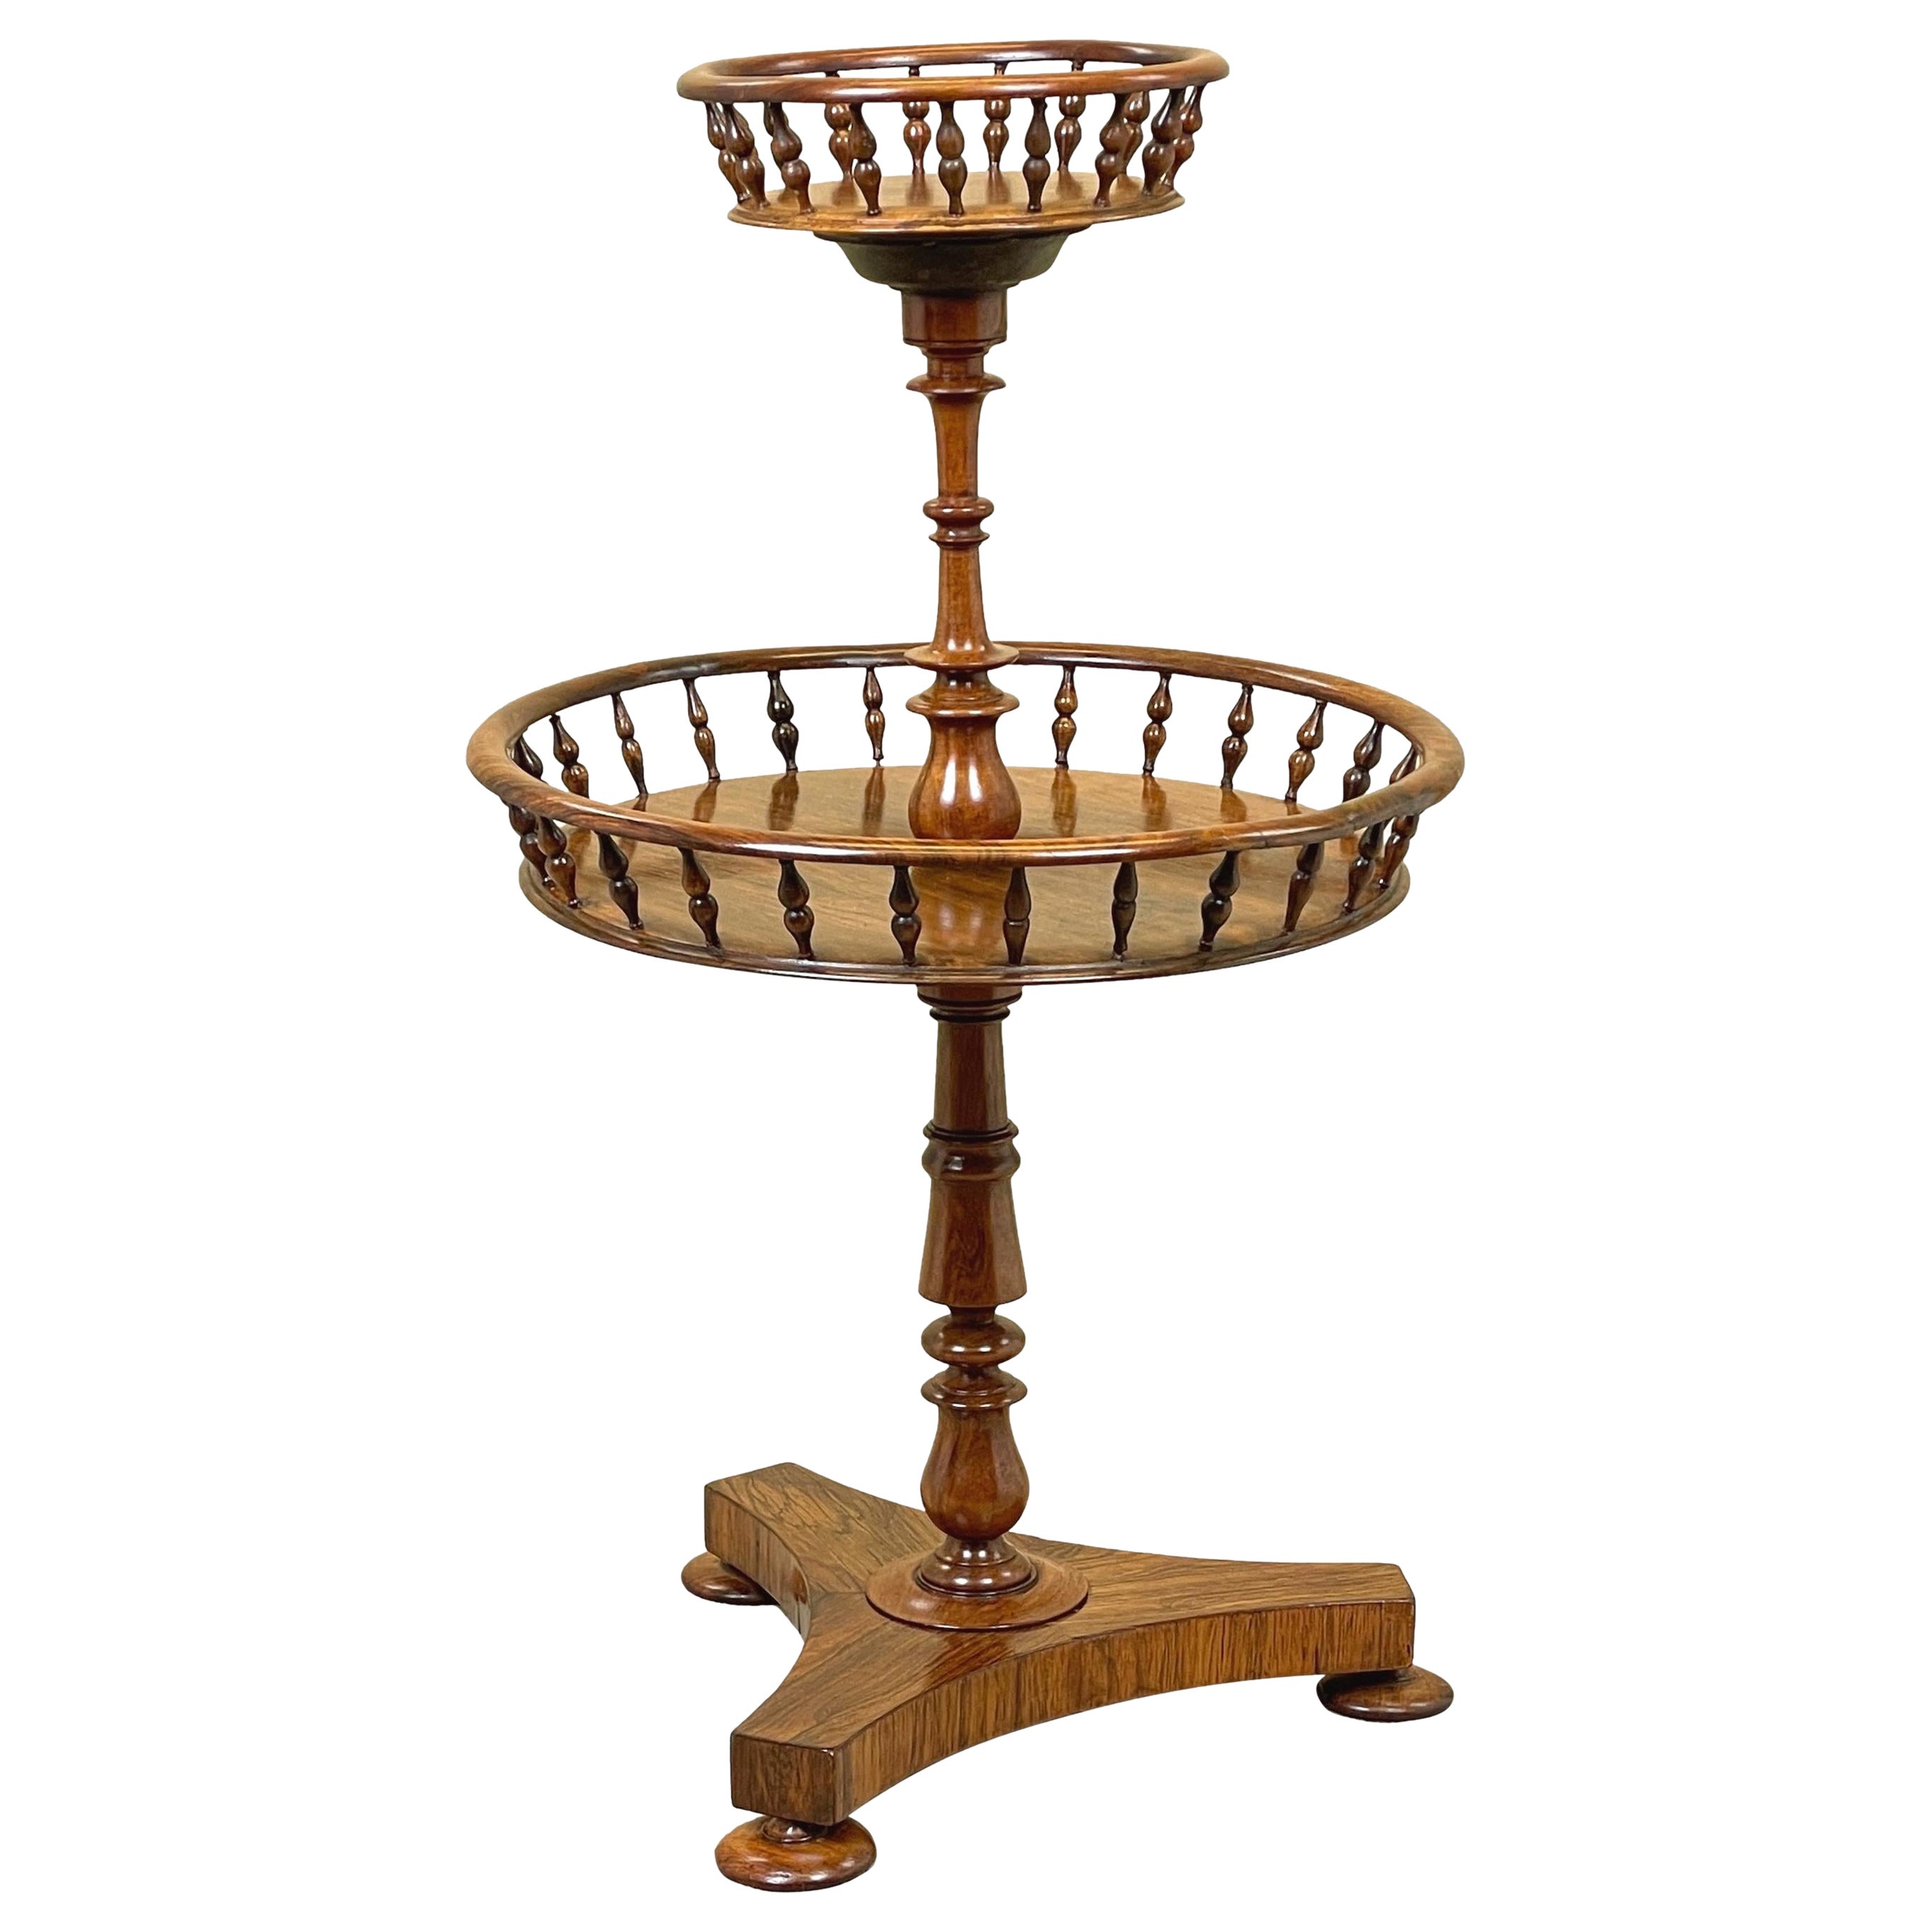 A very good quality Late Regency Period rosewood circular occasional table of unusual design, possibly originally designed for storage of wool, having two well figured circular tiers with elegant spindle turned galleries united by turned central